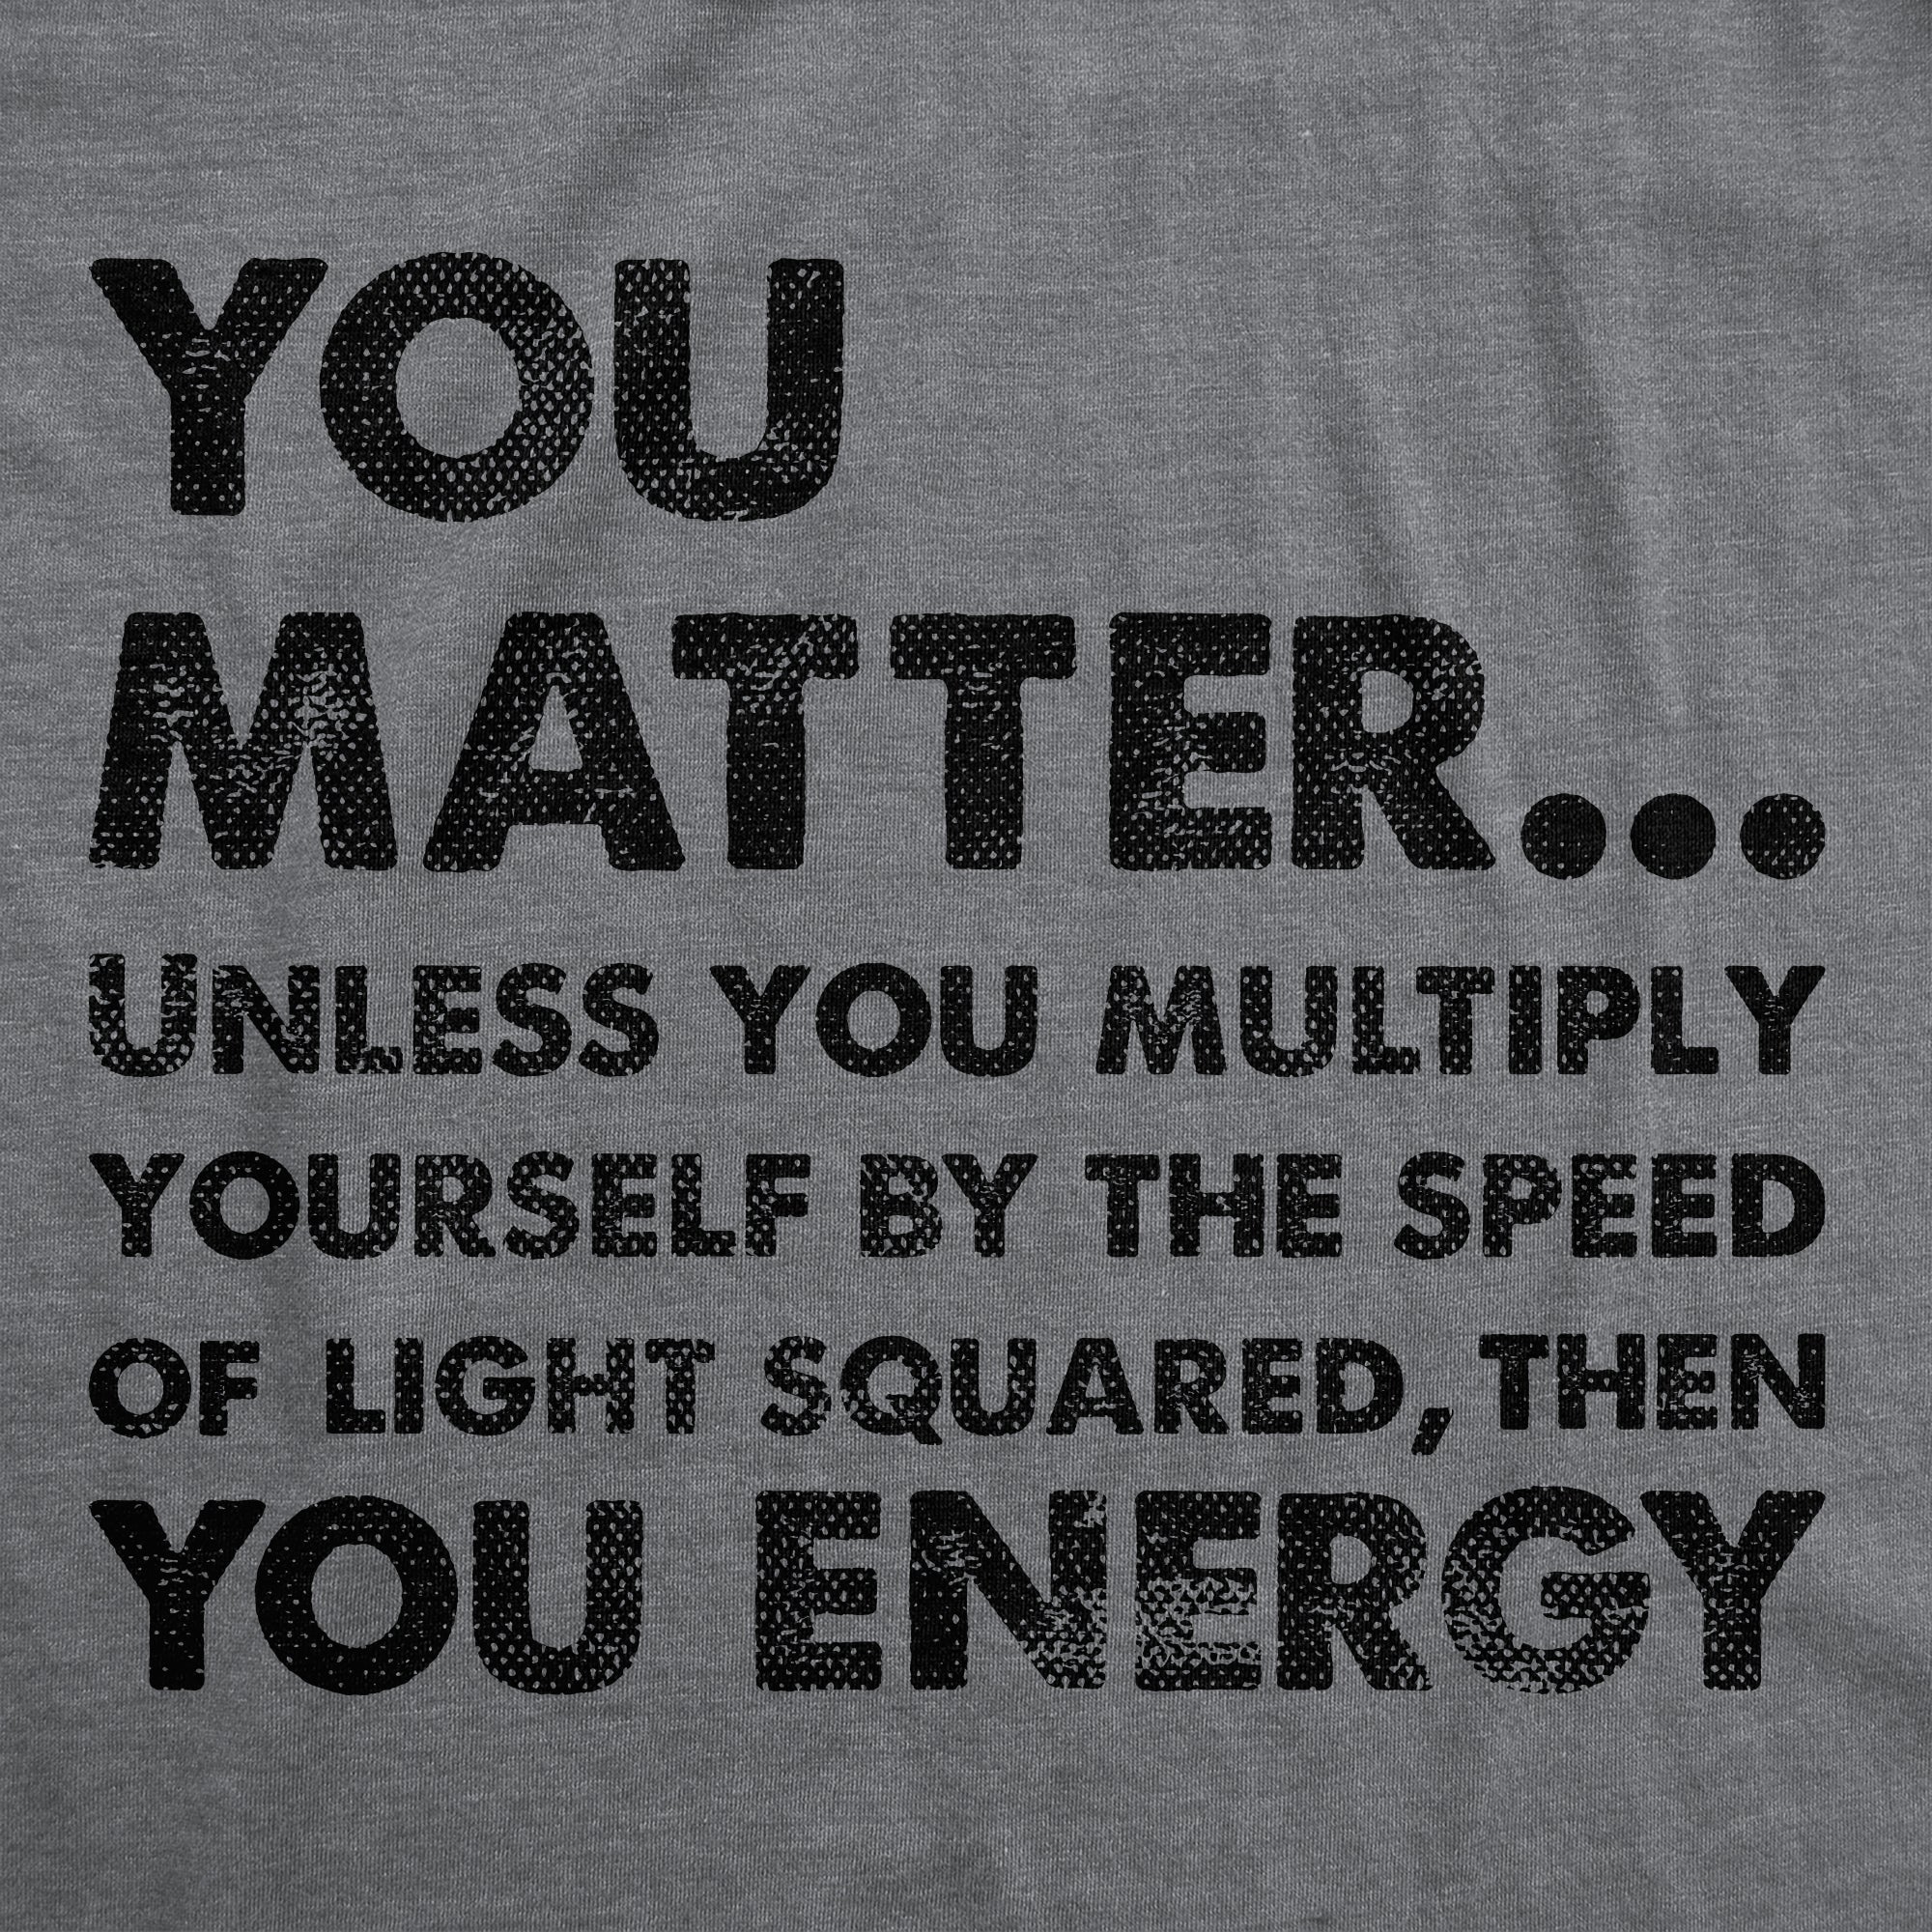 Funny Dark Heather Grey - You Matter You Energy You Matter Unless You Multiply Yourself By The Speed Of Light Squared Then You Energy Womens T Shirt Nerdy Nerdy science sarcastic Tee